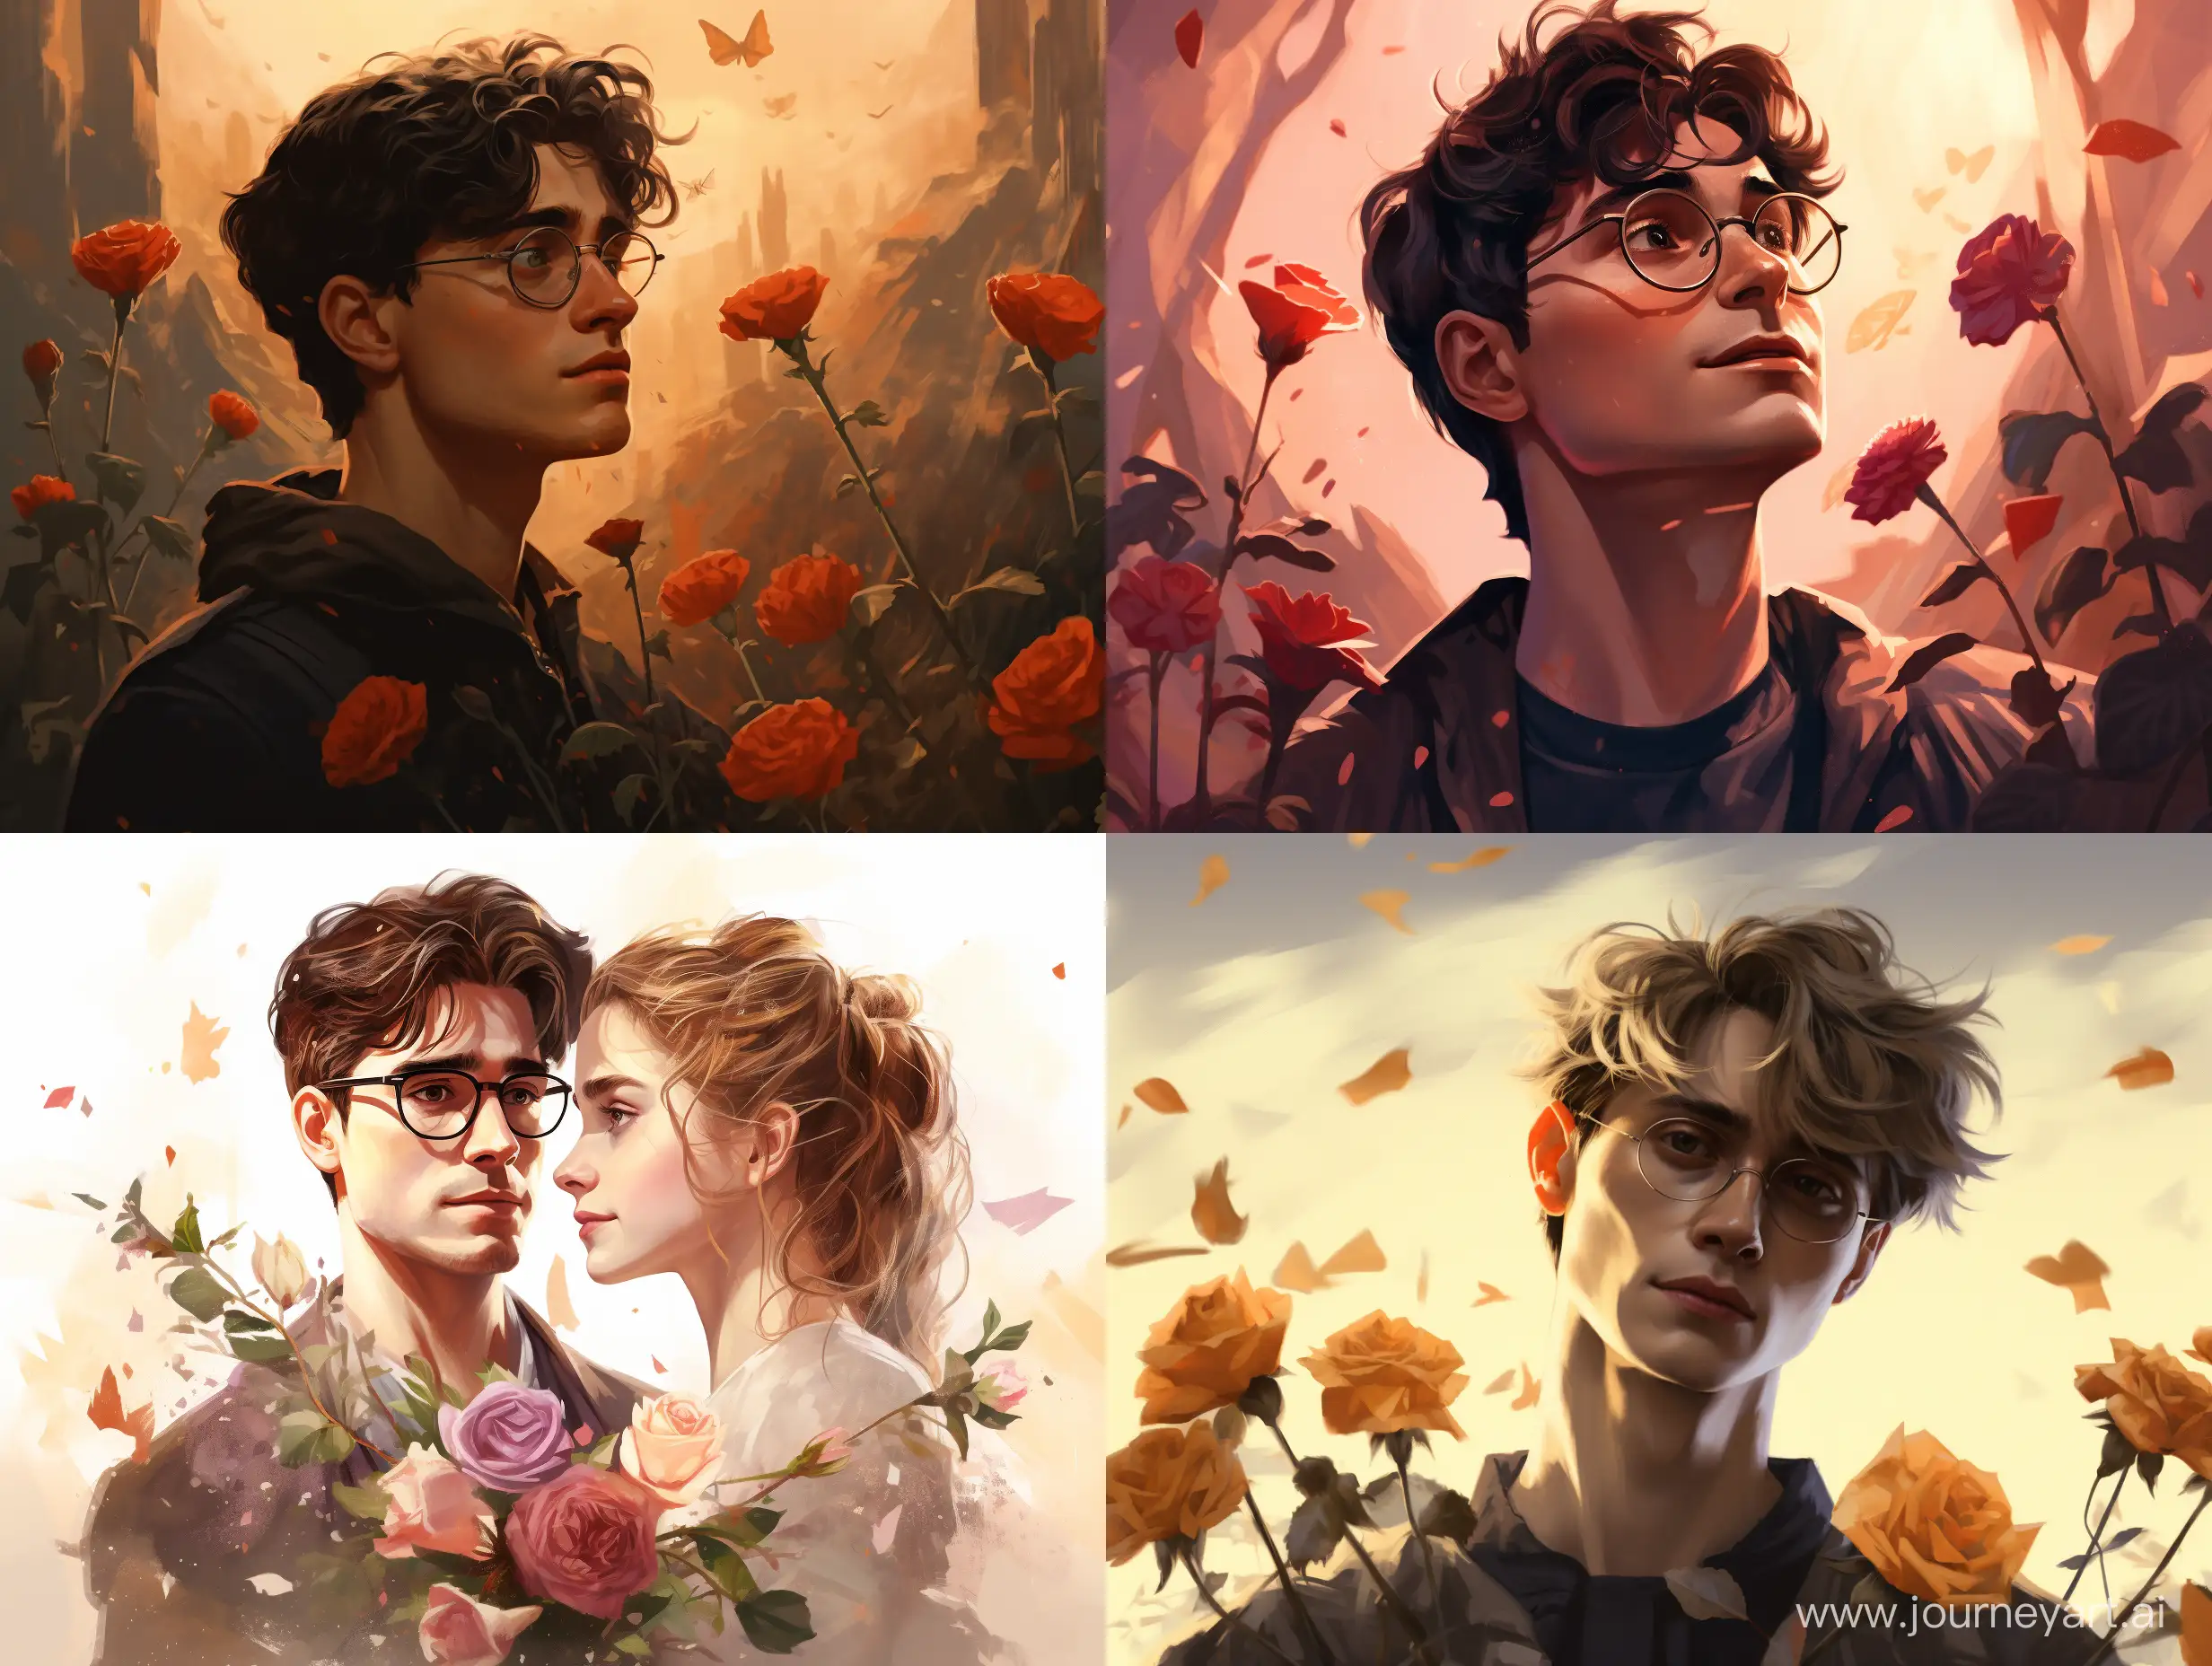 Harry-Potter-and-the-Enchanting-Flower-of-Mary-Magical-Artwork-in-43-Aspect-Ratio